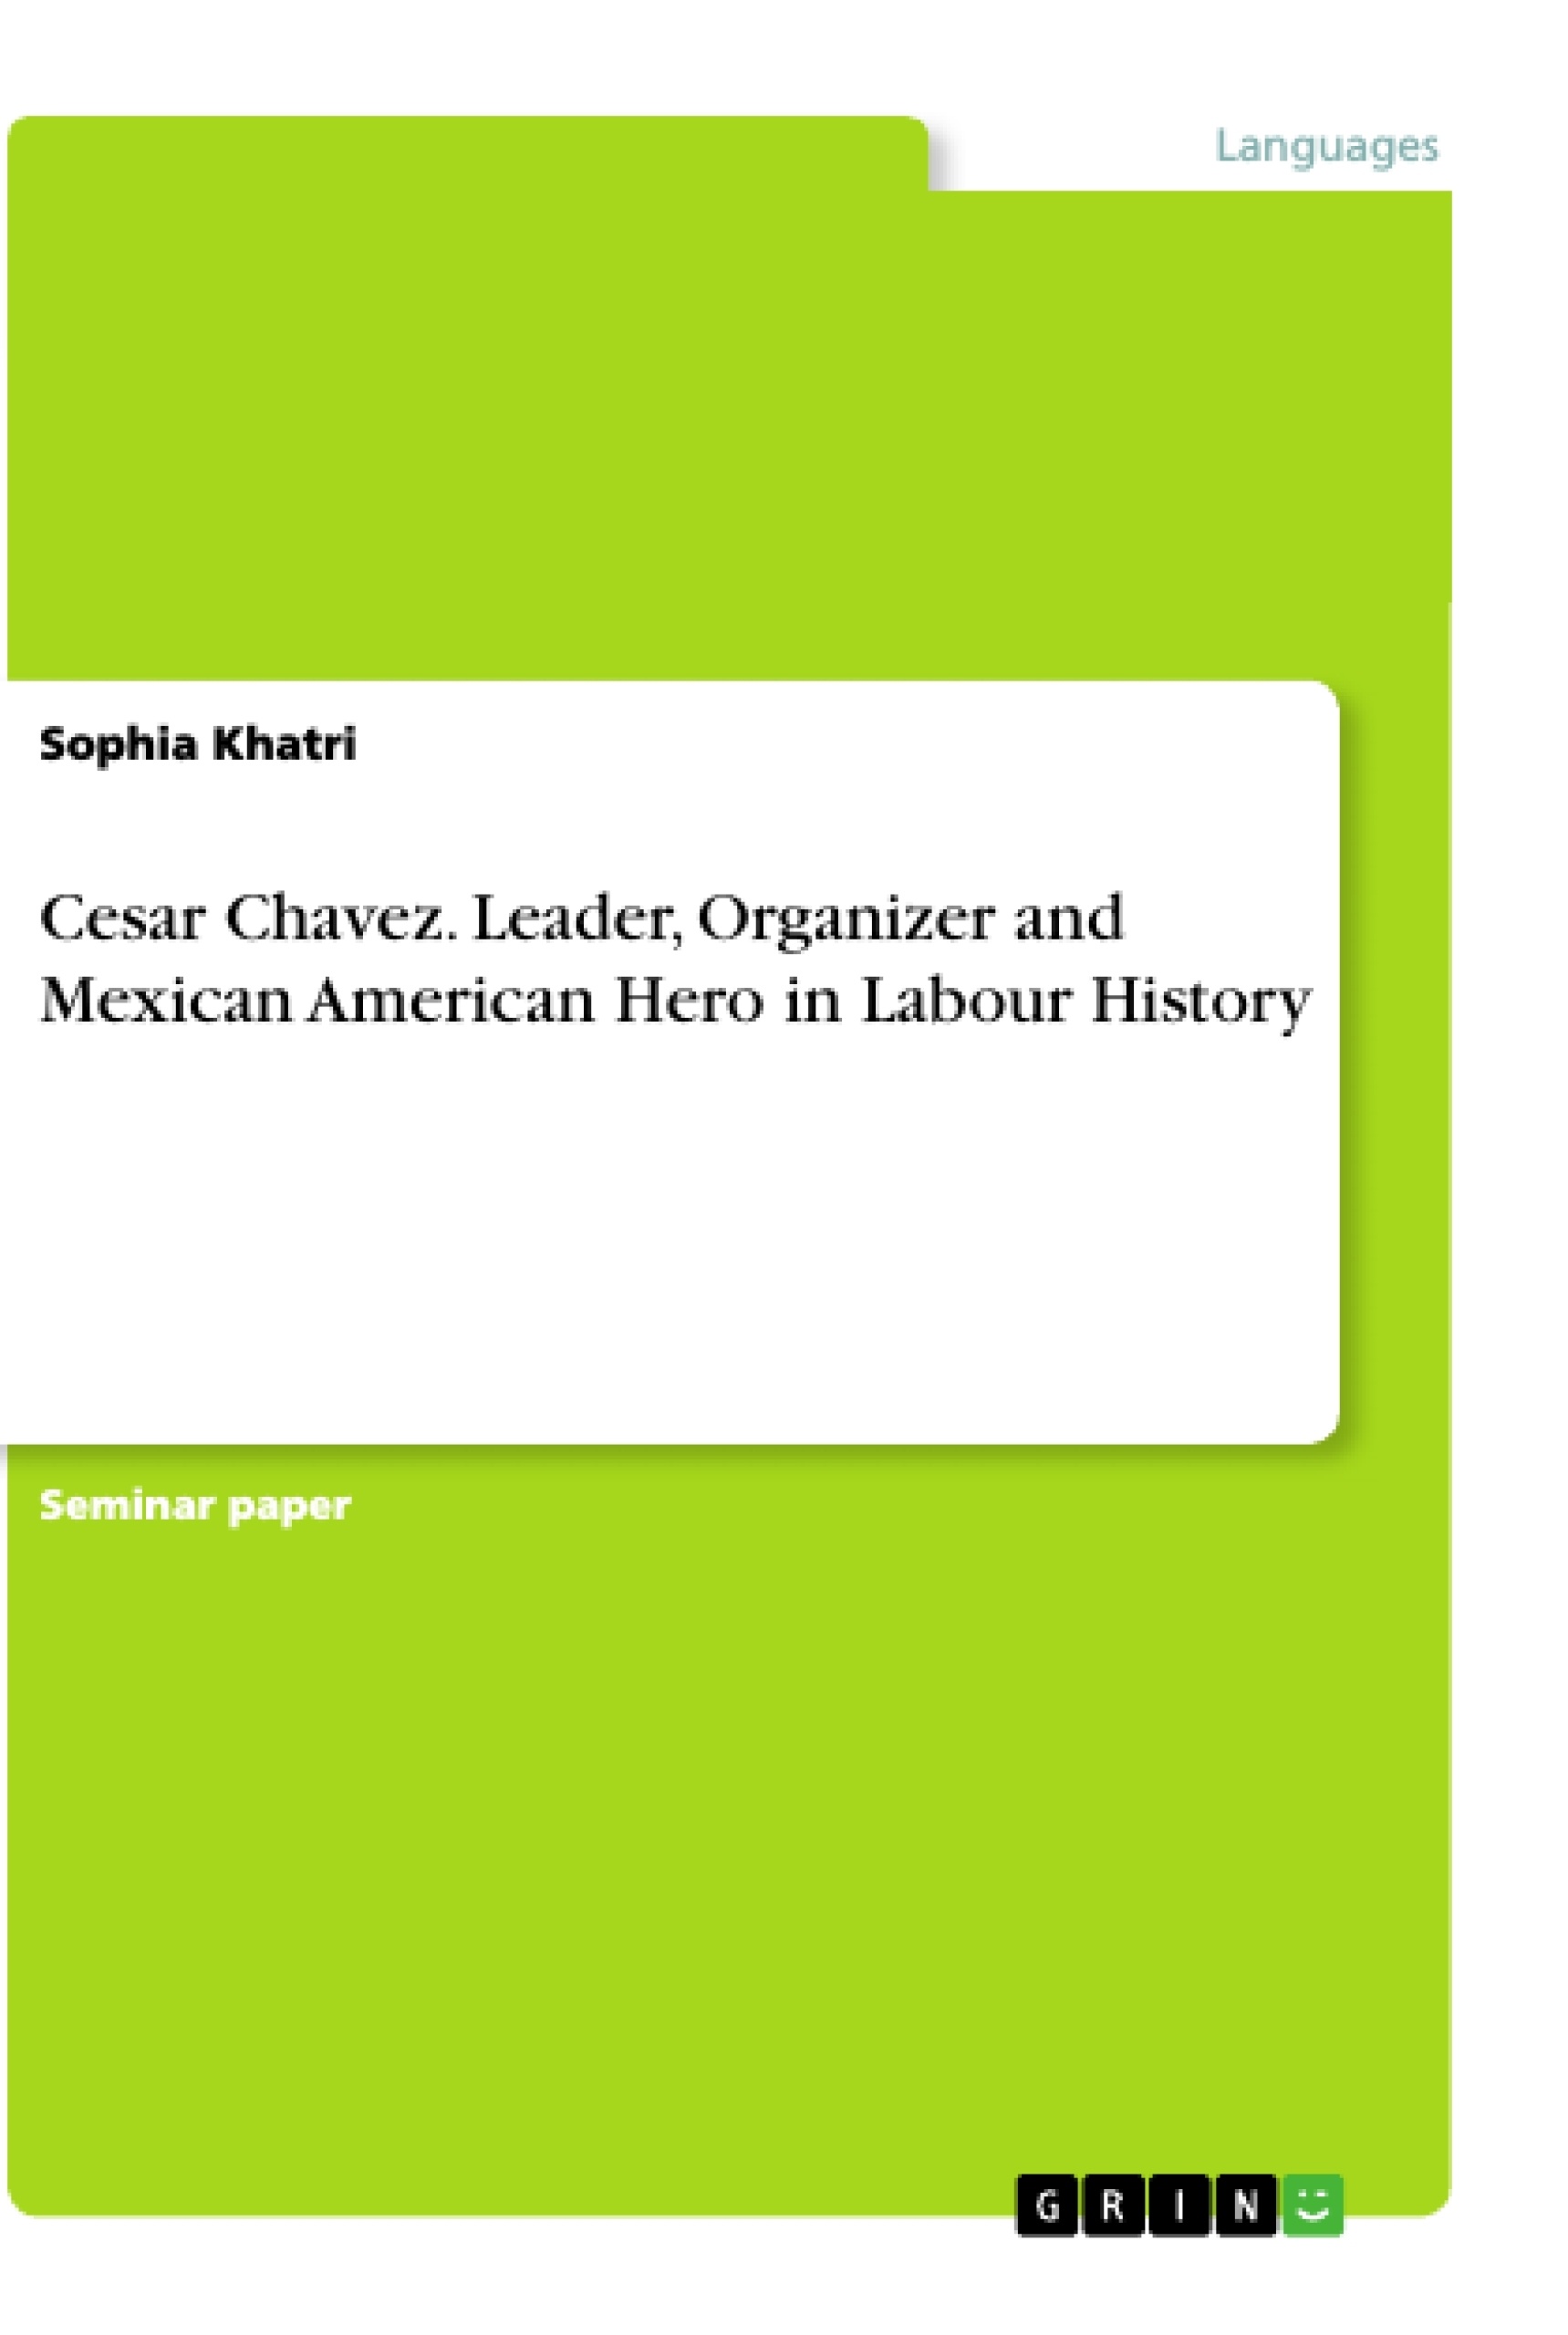 Title: Cesar Chavez. Leader, Organizer and Mexican American Hero in Labour History